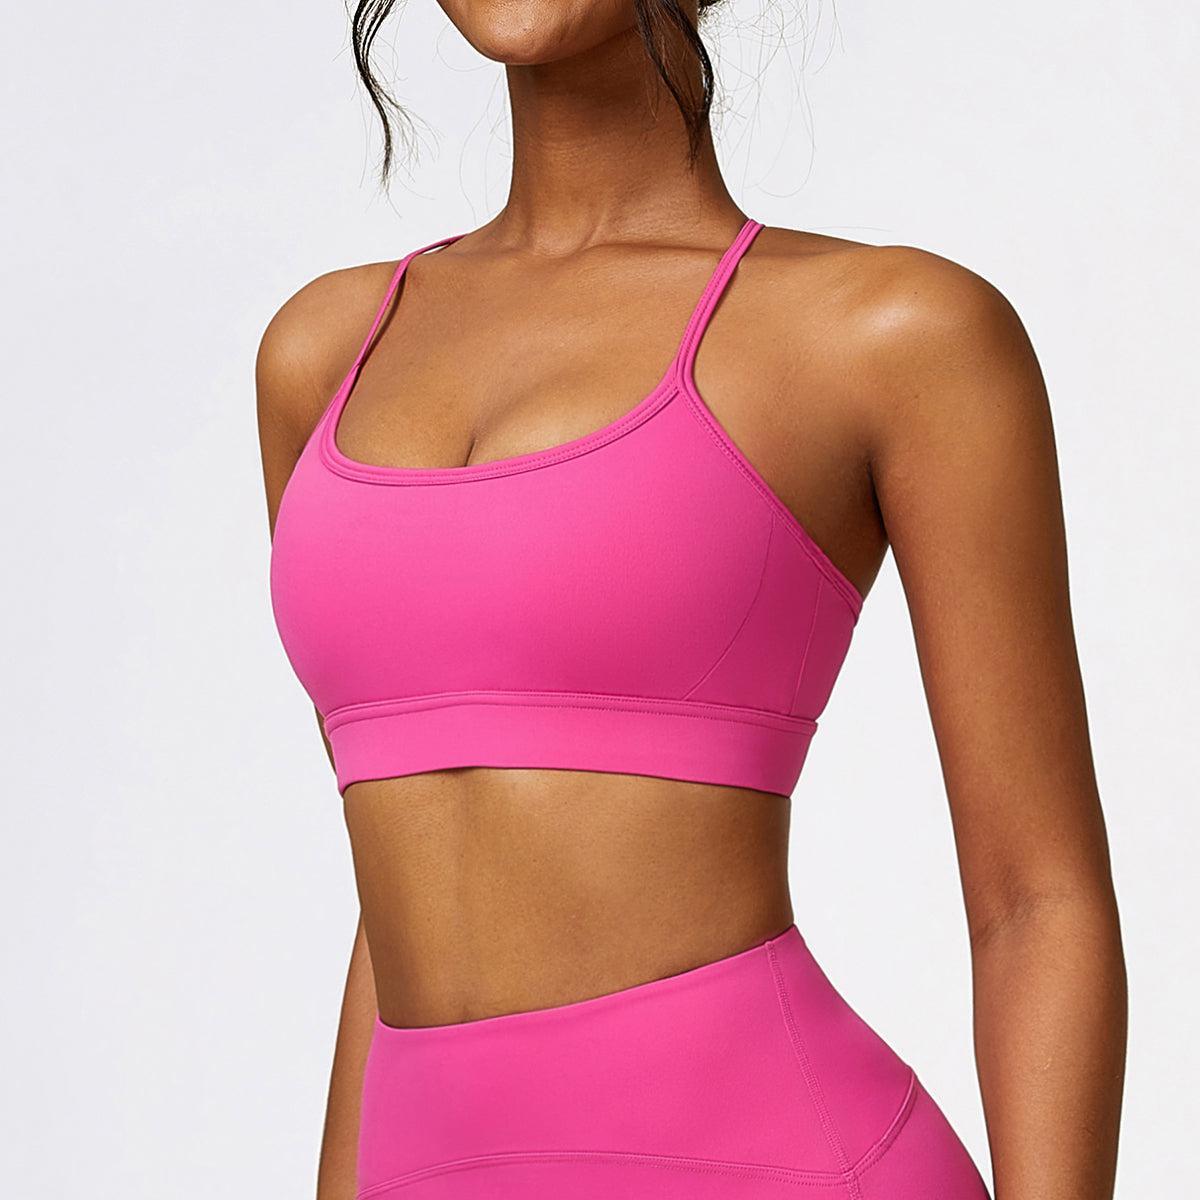 a woman in a pink sports bra top